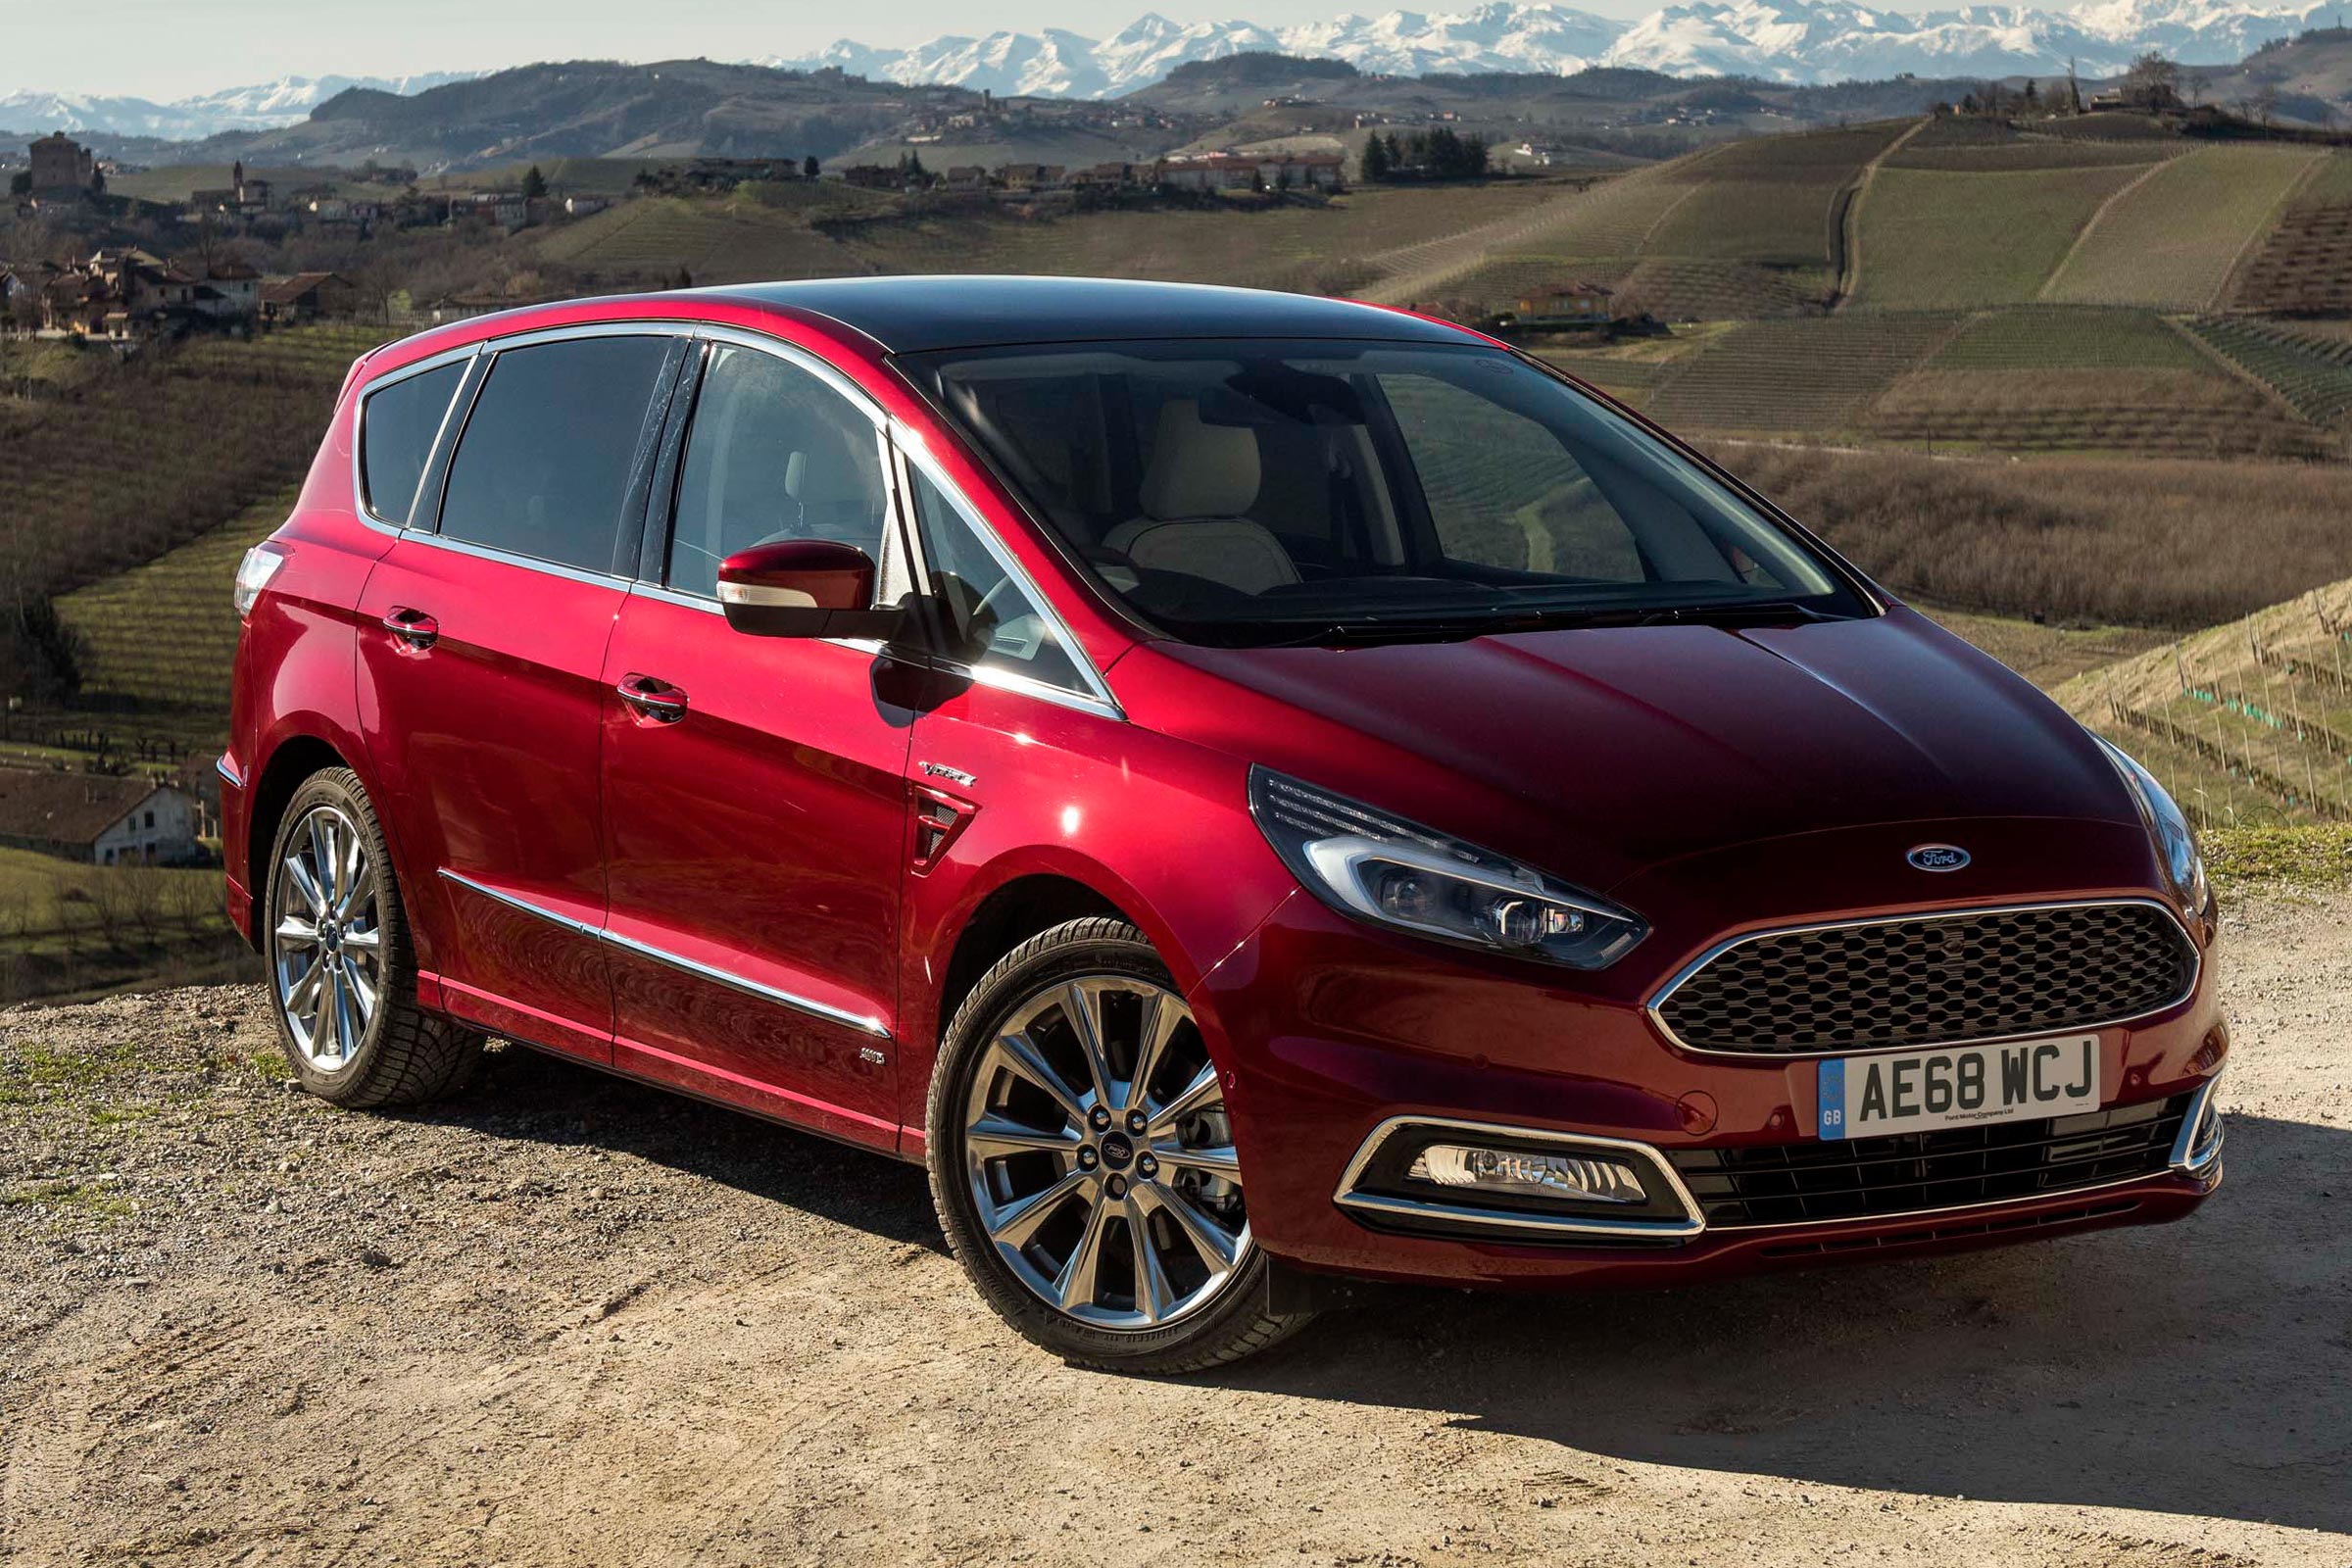 Ford SMAX and Ford Galaxy updated for 2018 Carbuyer